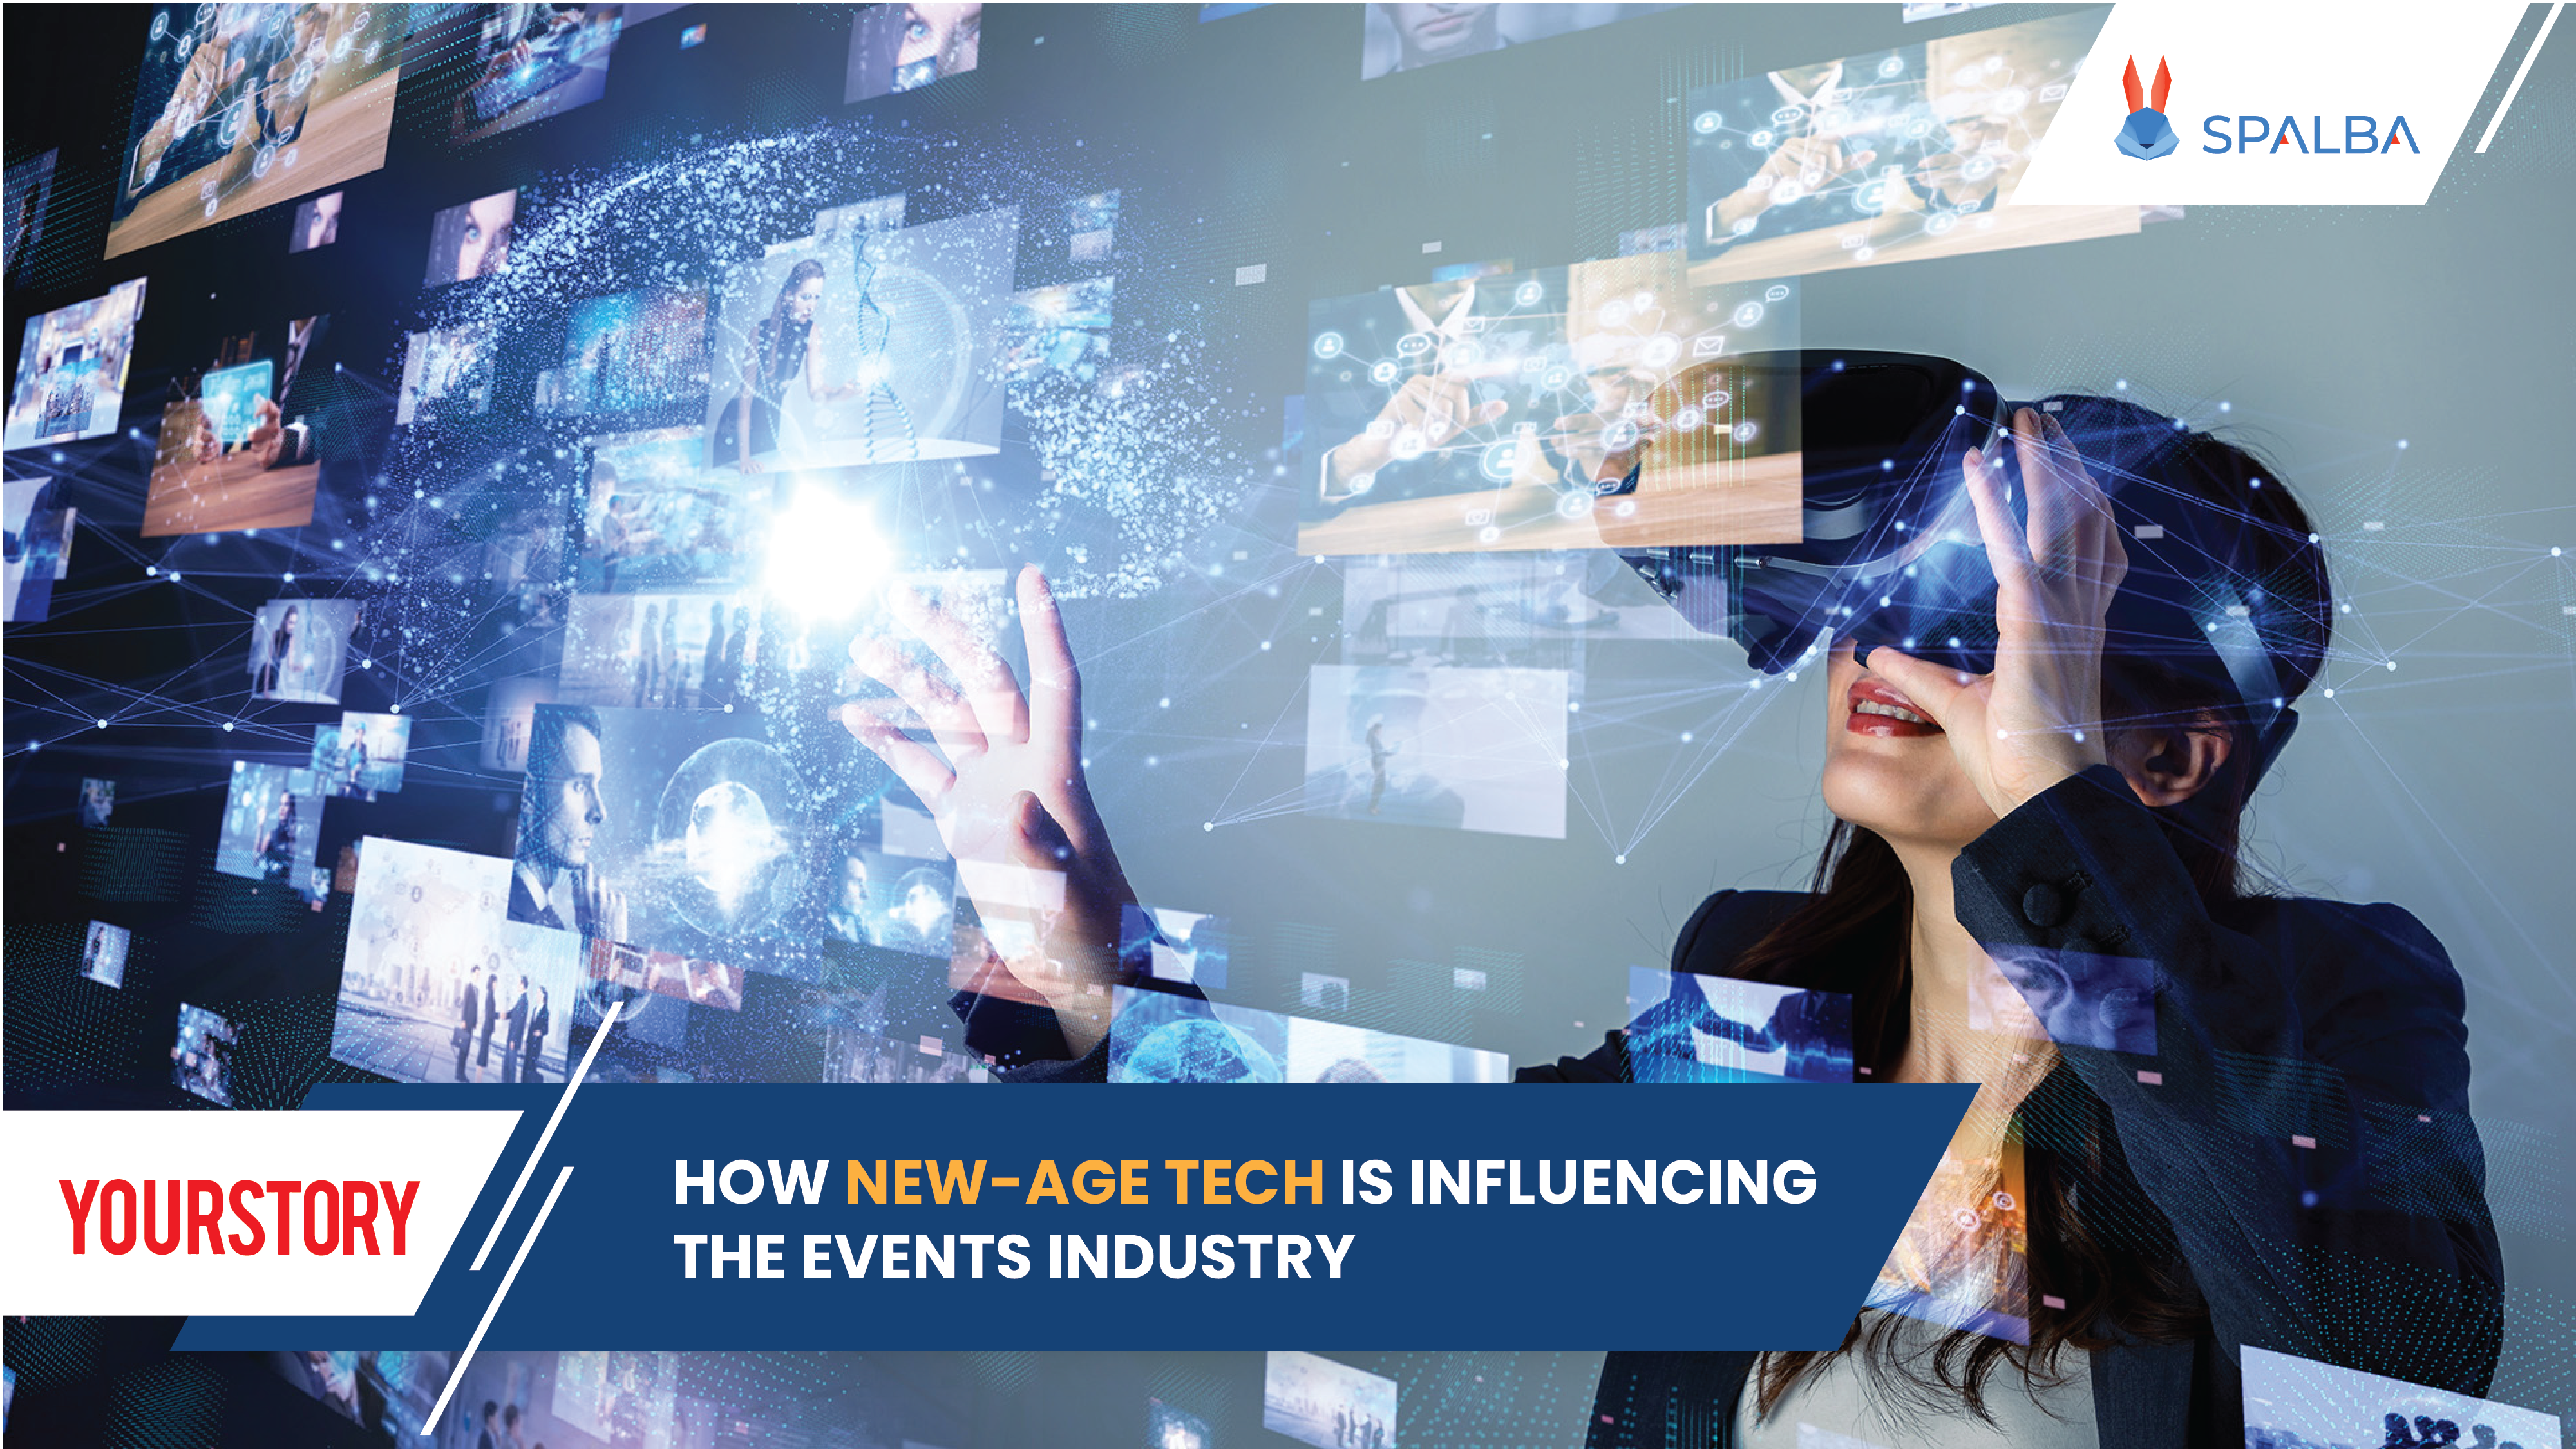 How new-age tech is influencing the events industry